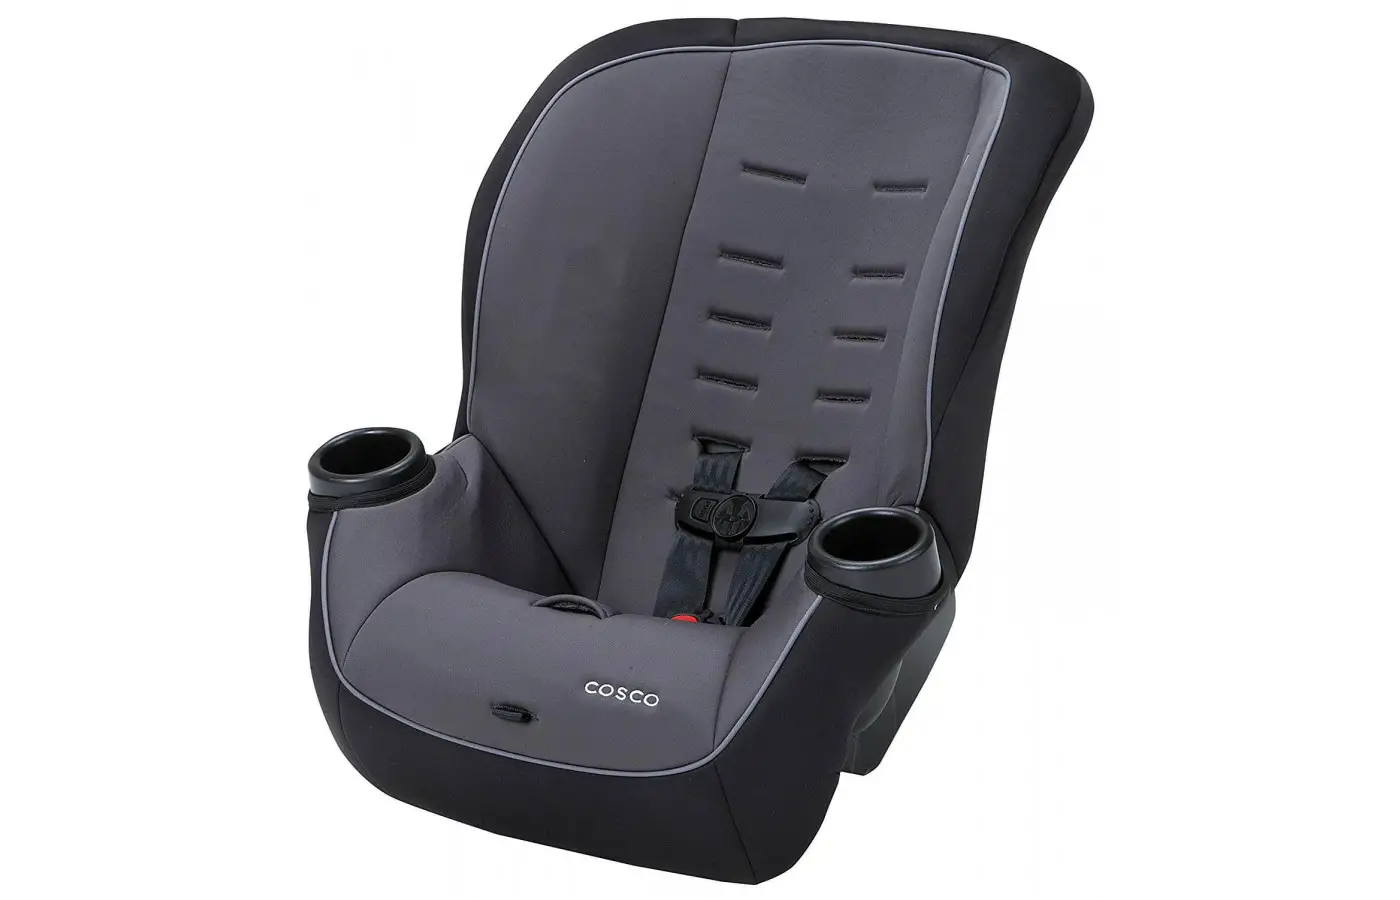 This is a convertible car seat